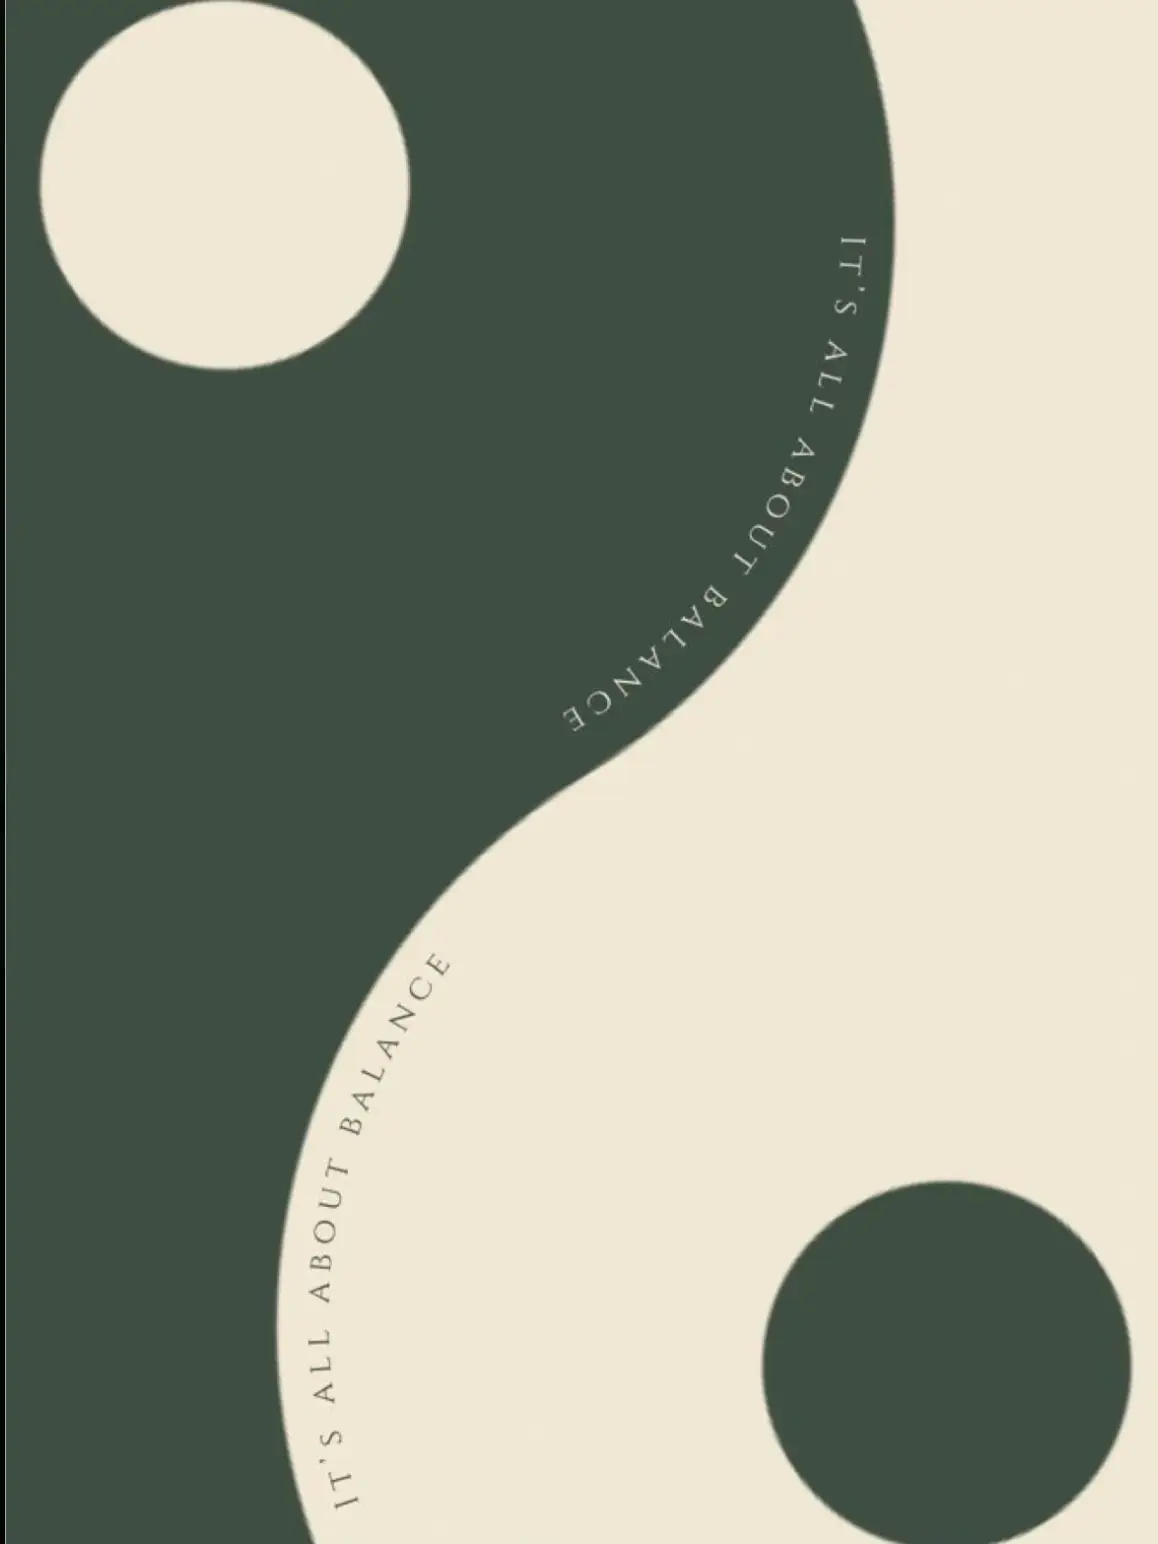  A green circle with a white border and the words "It's all about balance" written on top.